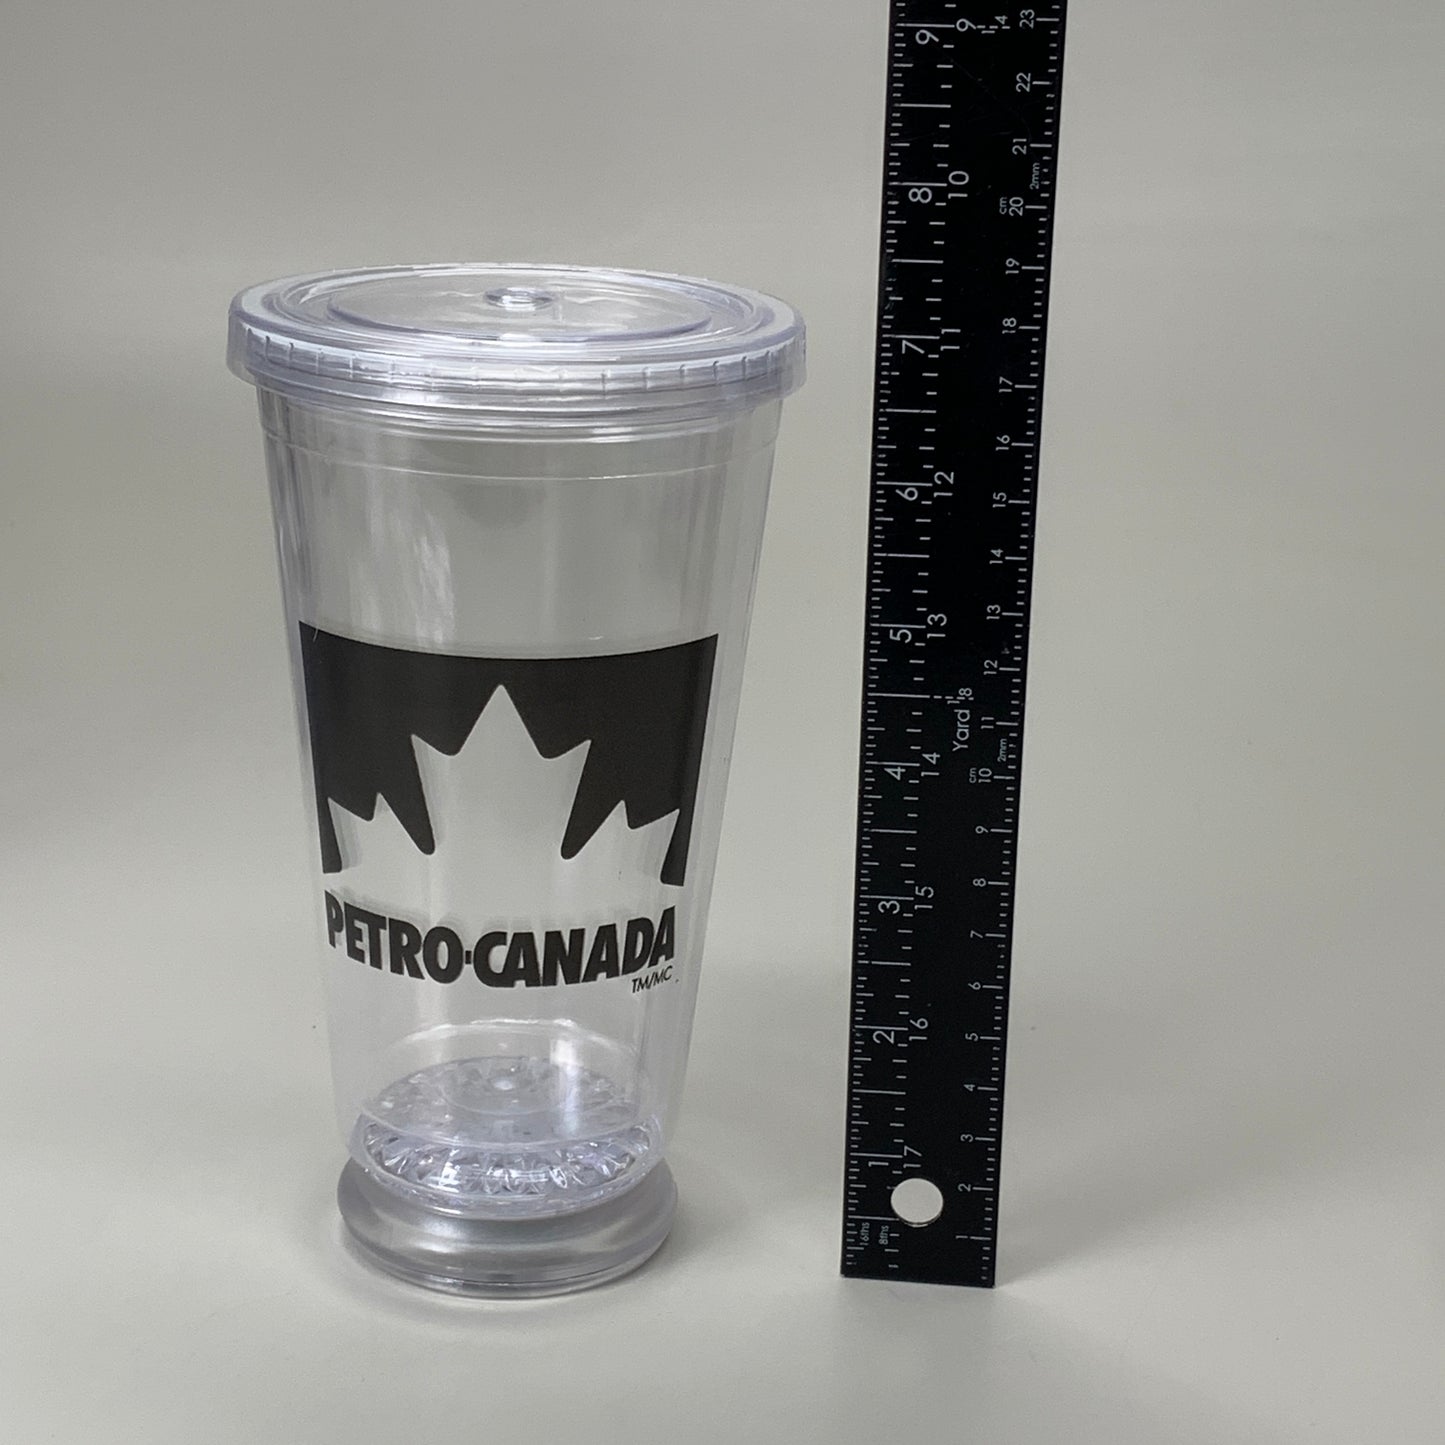 PETRO-CANADA 10PK Clear Light-up Reusable Cup With Lid and Straws